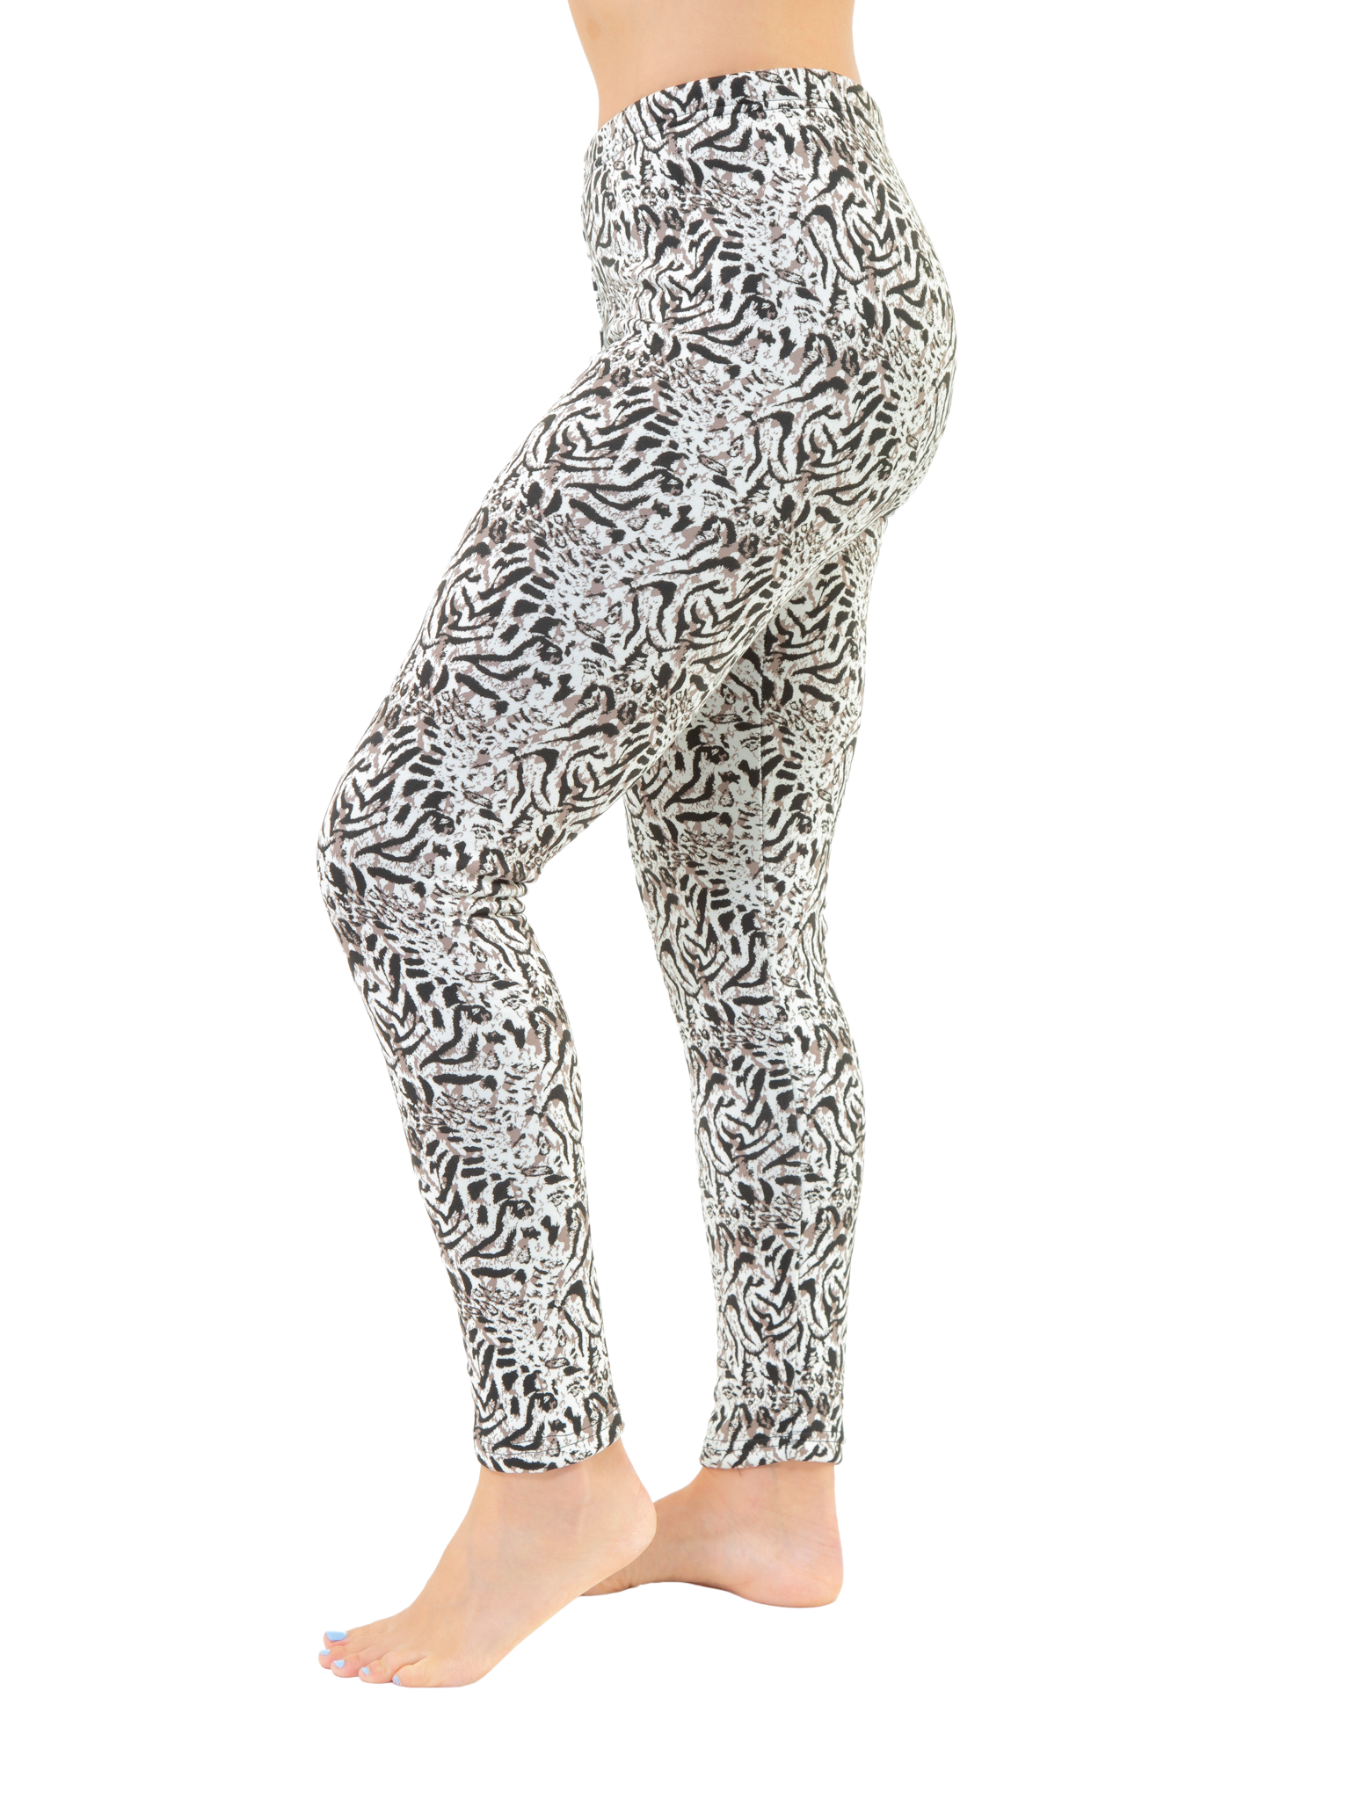 Multi-Pack: Womens Ultra-Soft Cozy Seamless Marled Space Dye